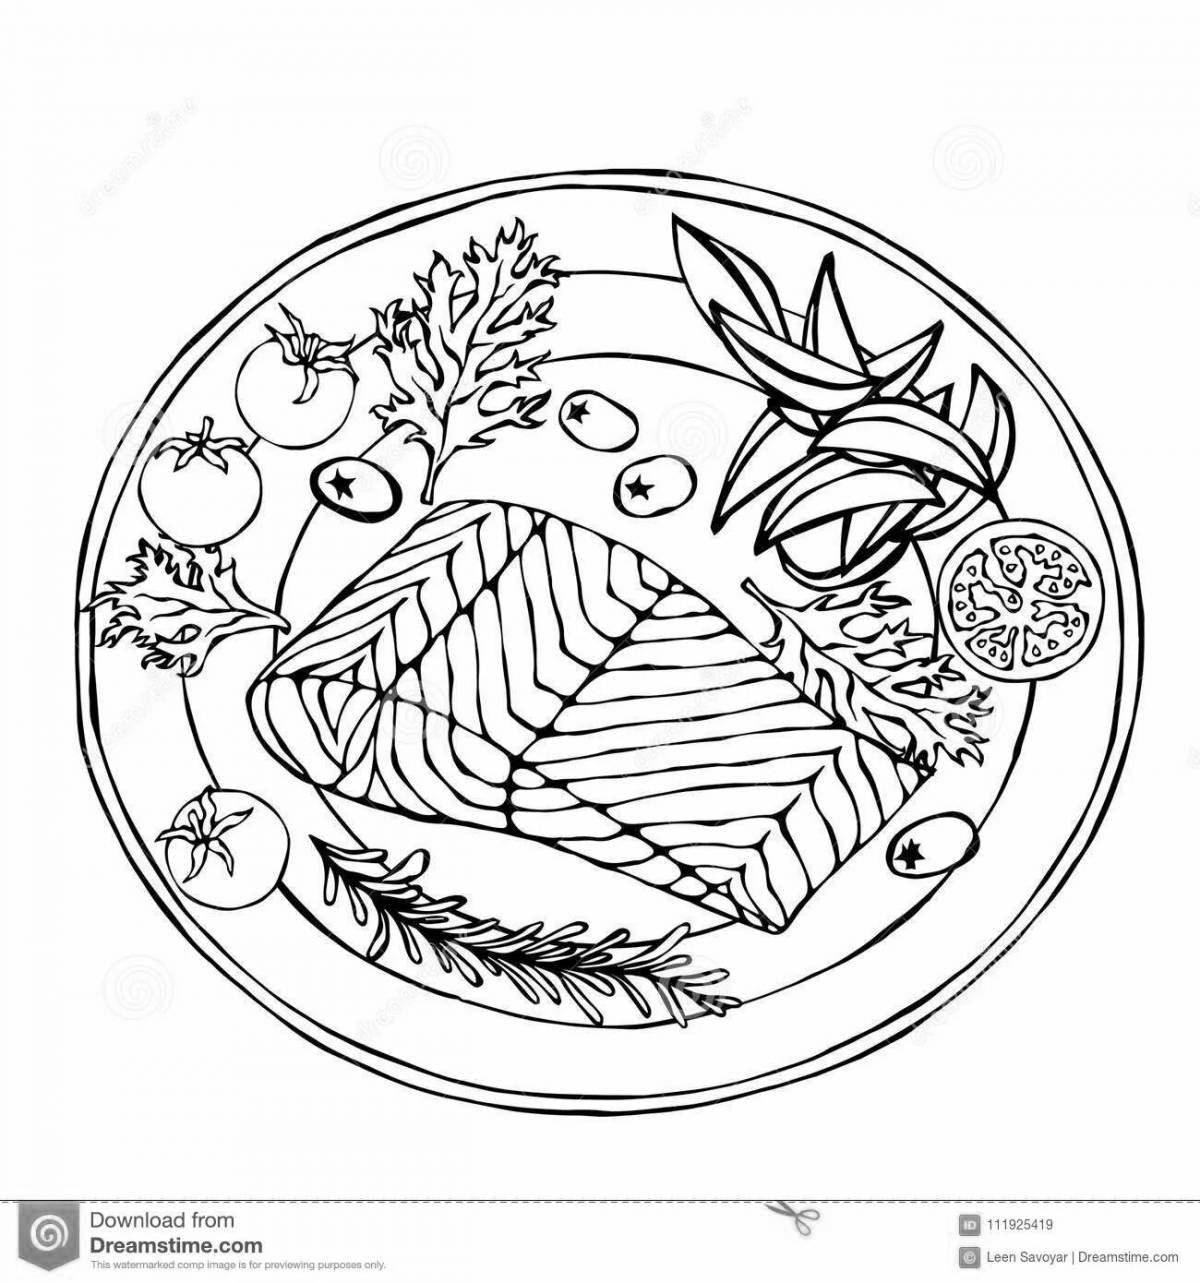 Animated fried fish coloring page